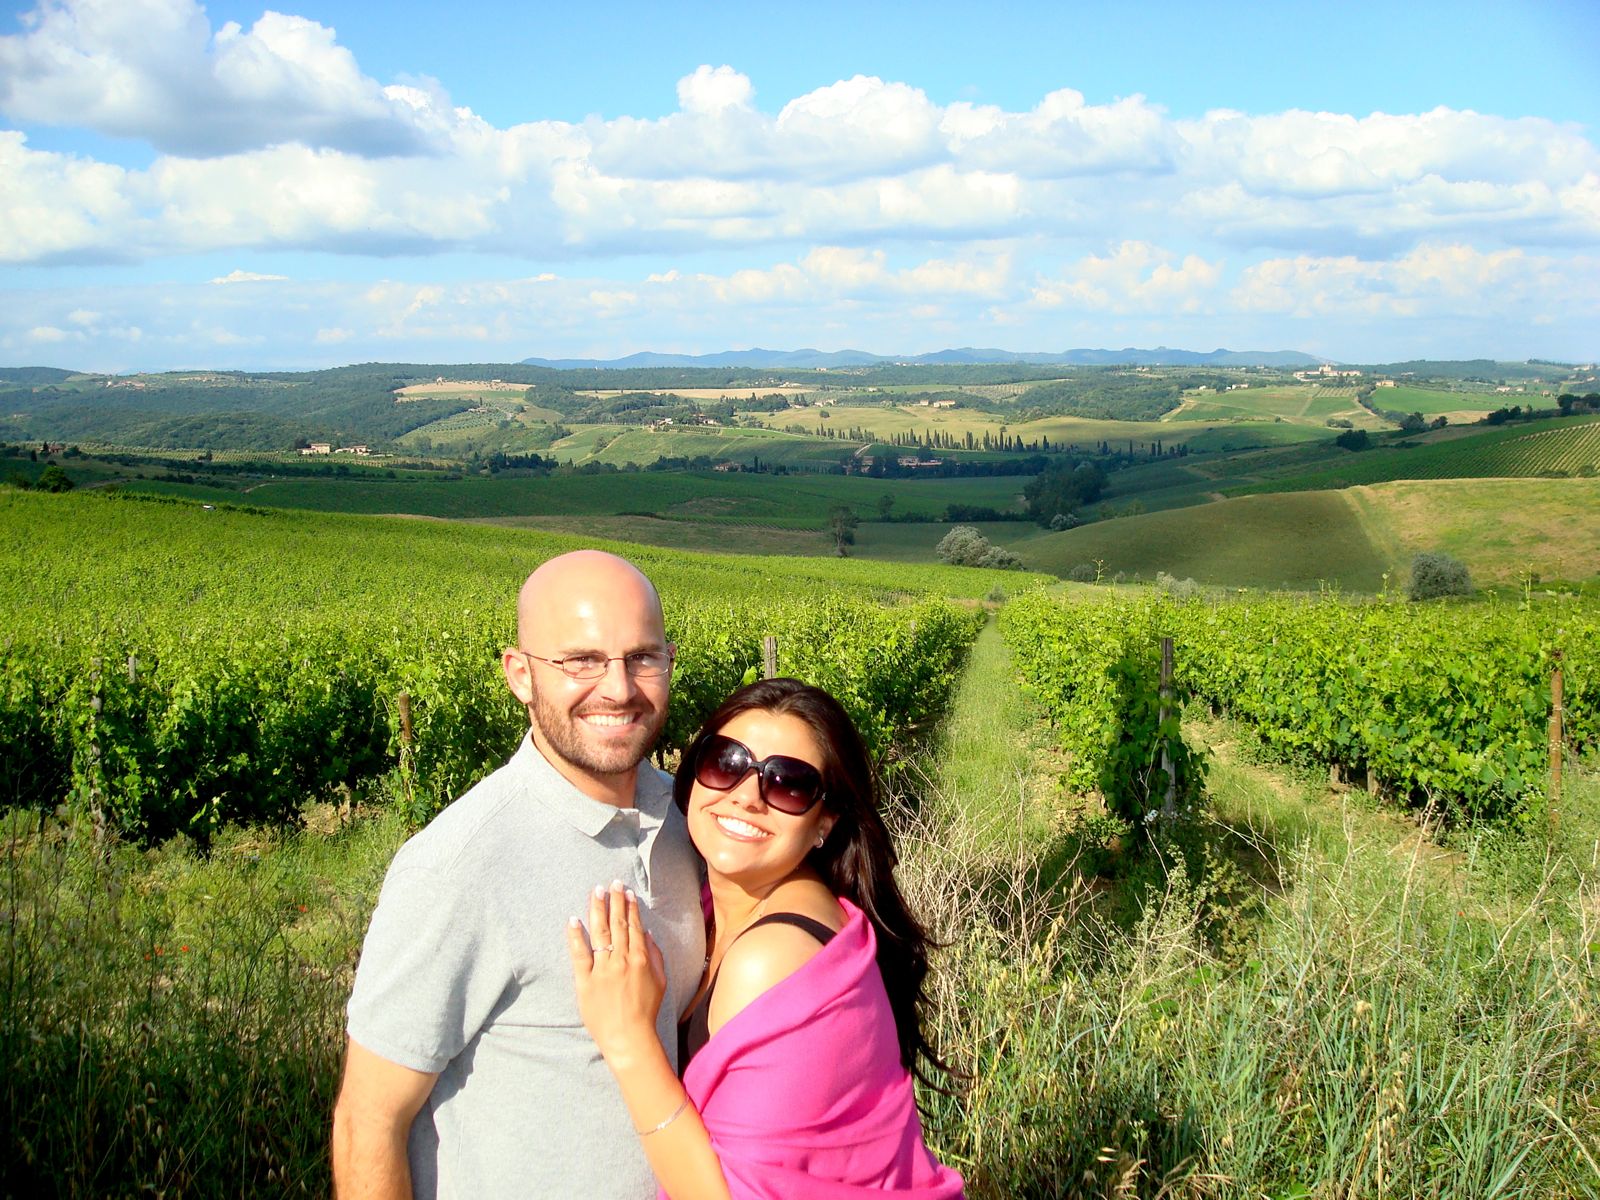 [Mike+and+Vanessa+in+Tuscany.jpg]